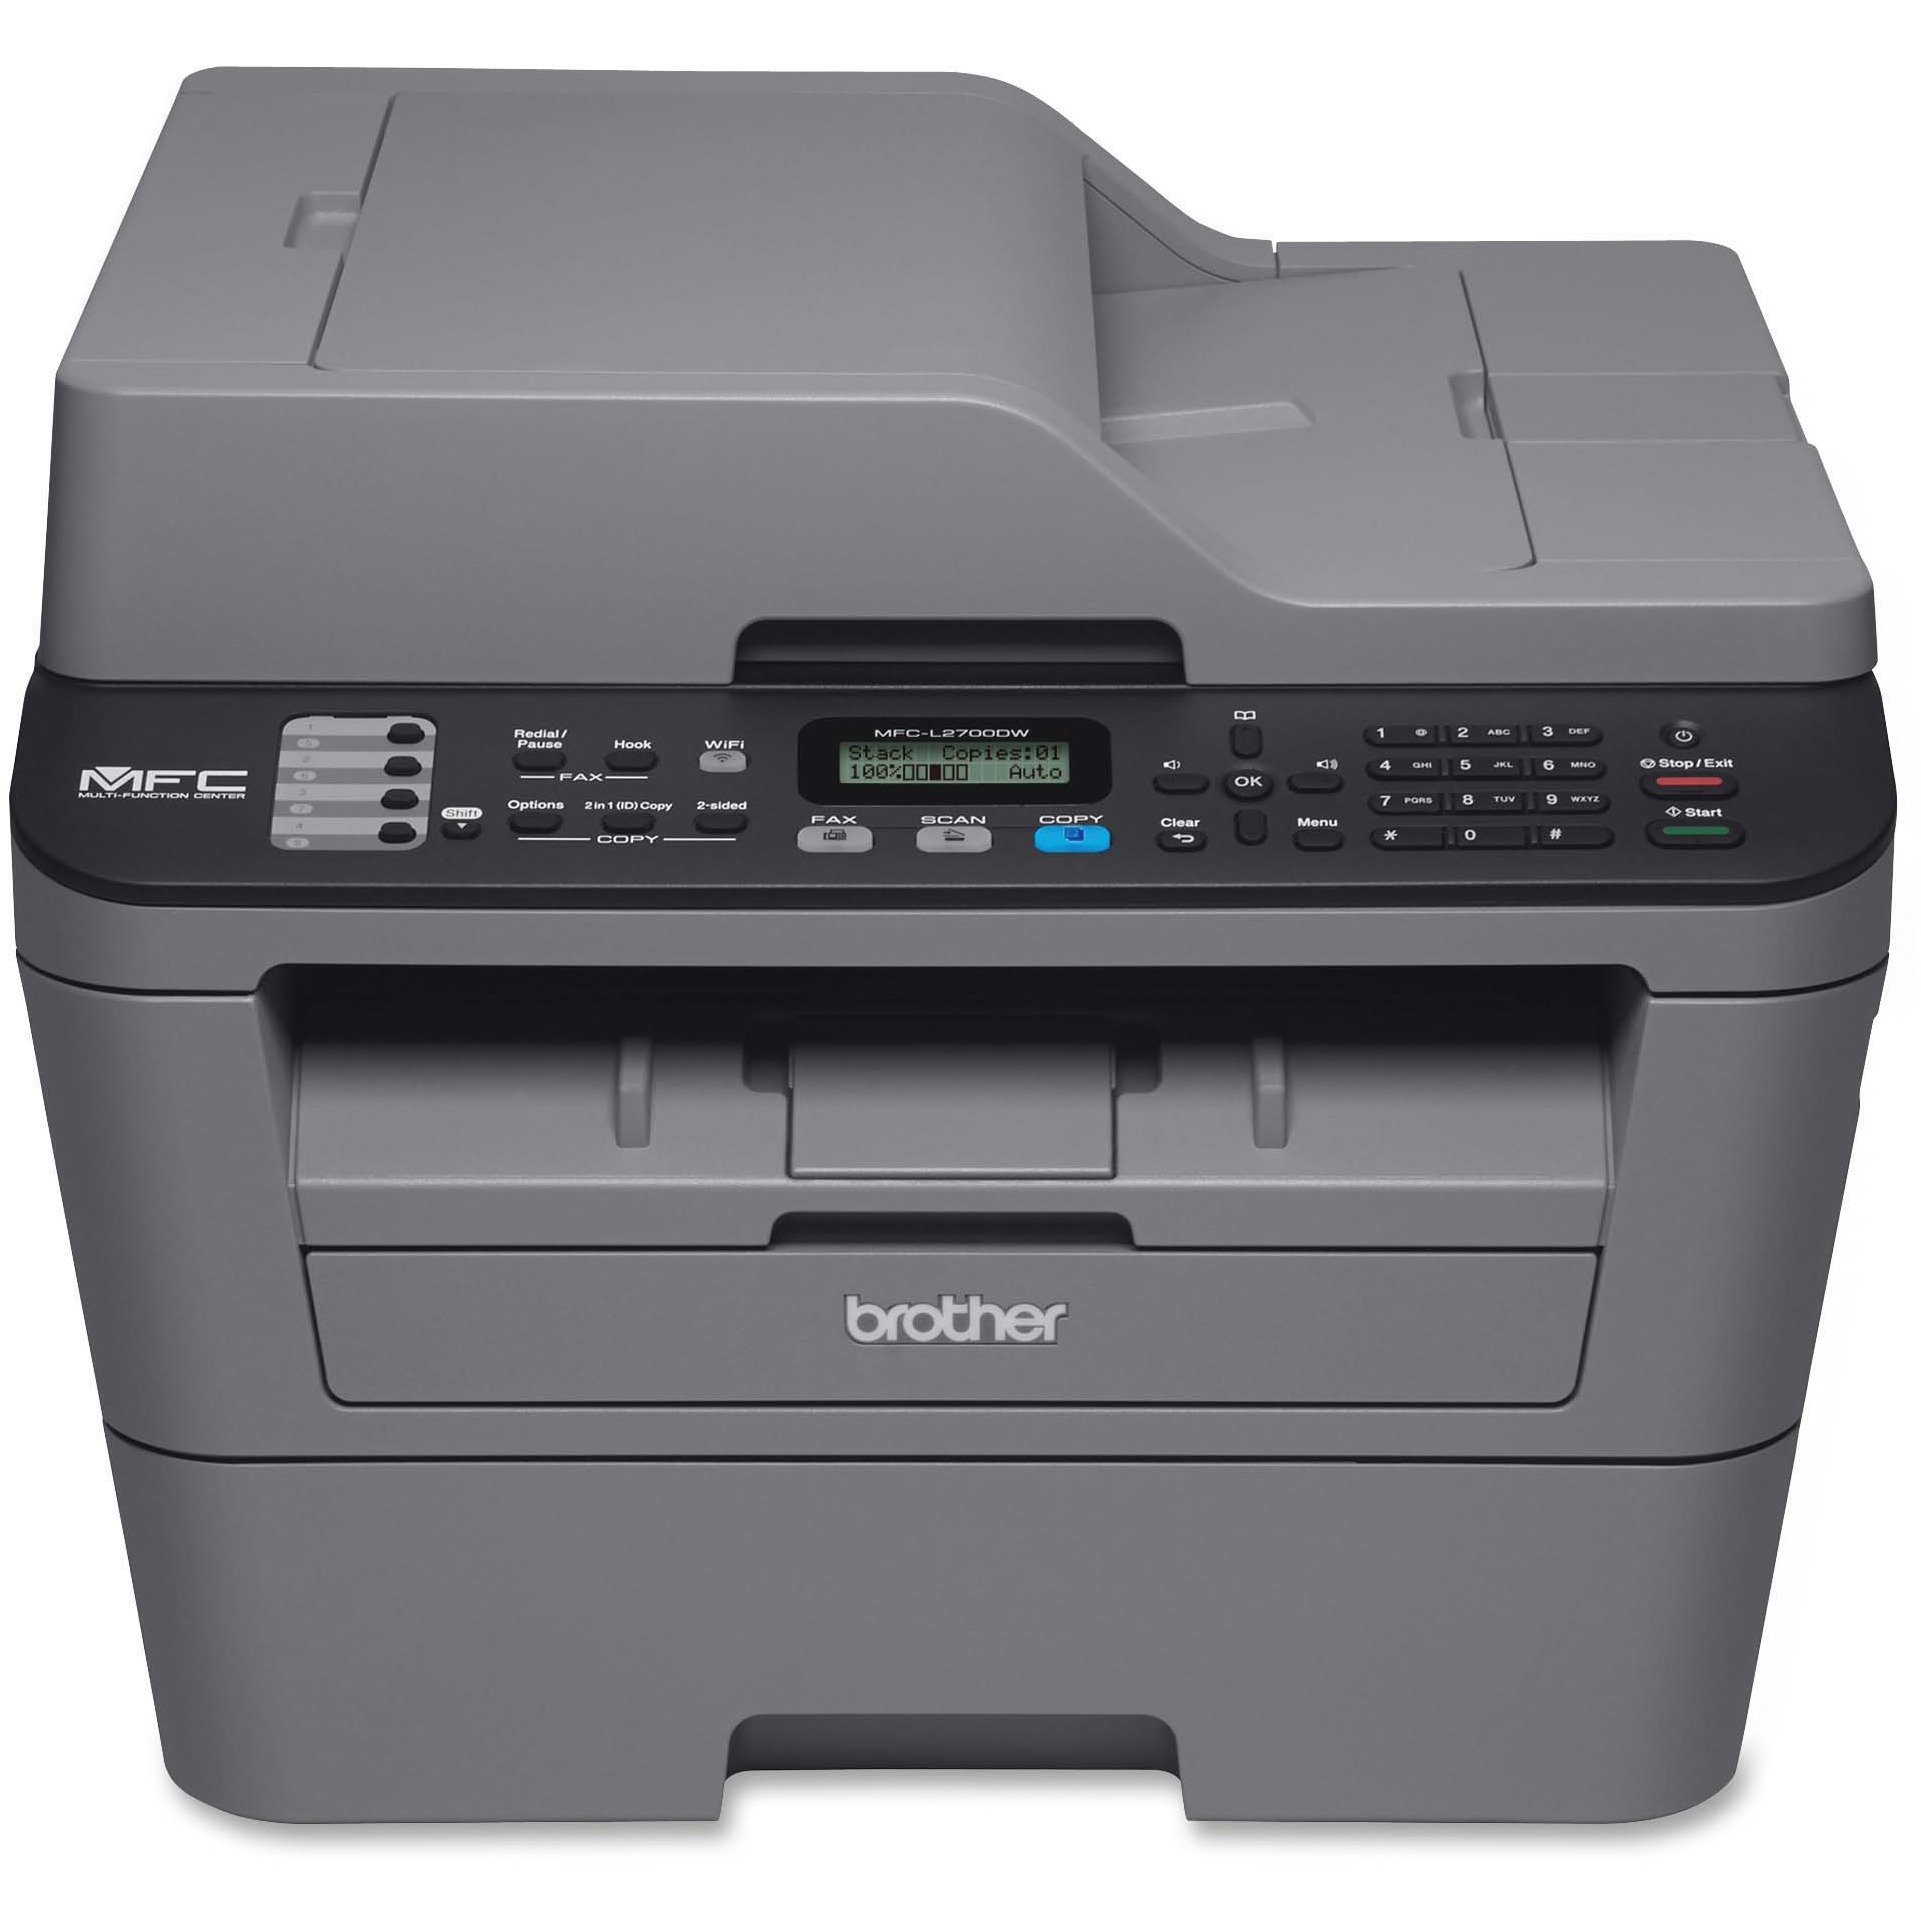 Brother MFC-L2700DW Compact Wireless Laser All-in-One, Copy/Fax/Print/Scan - image 1 of 3